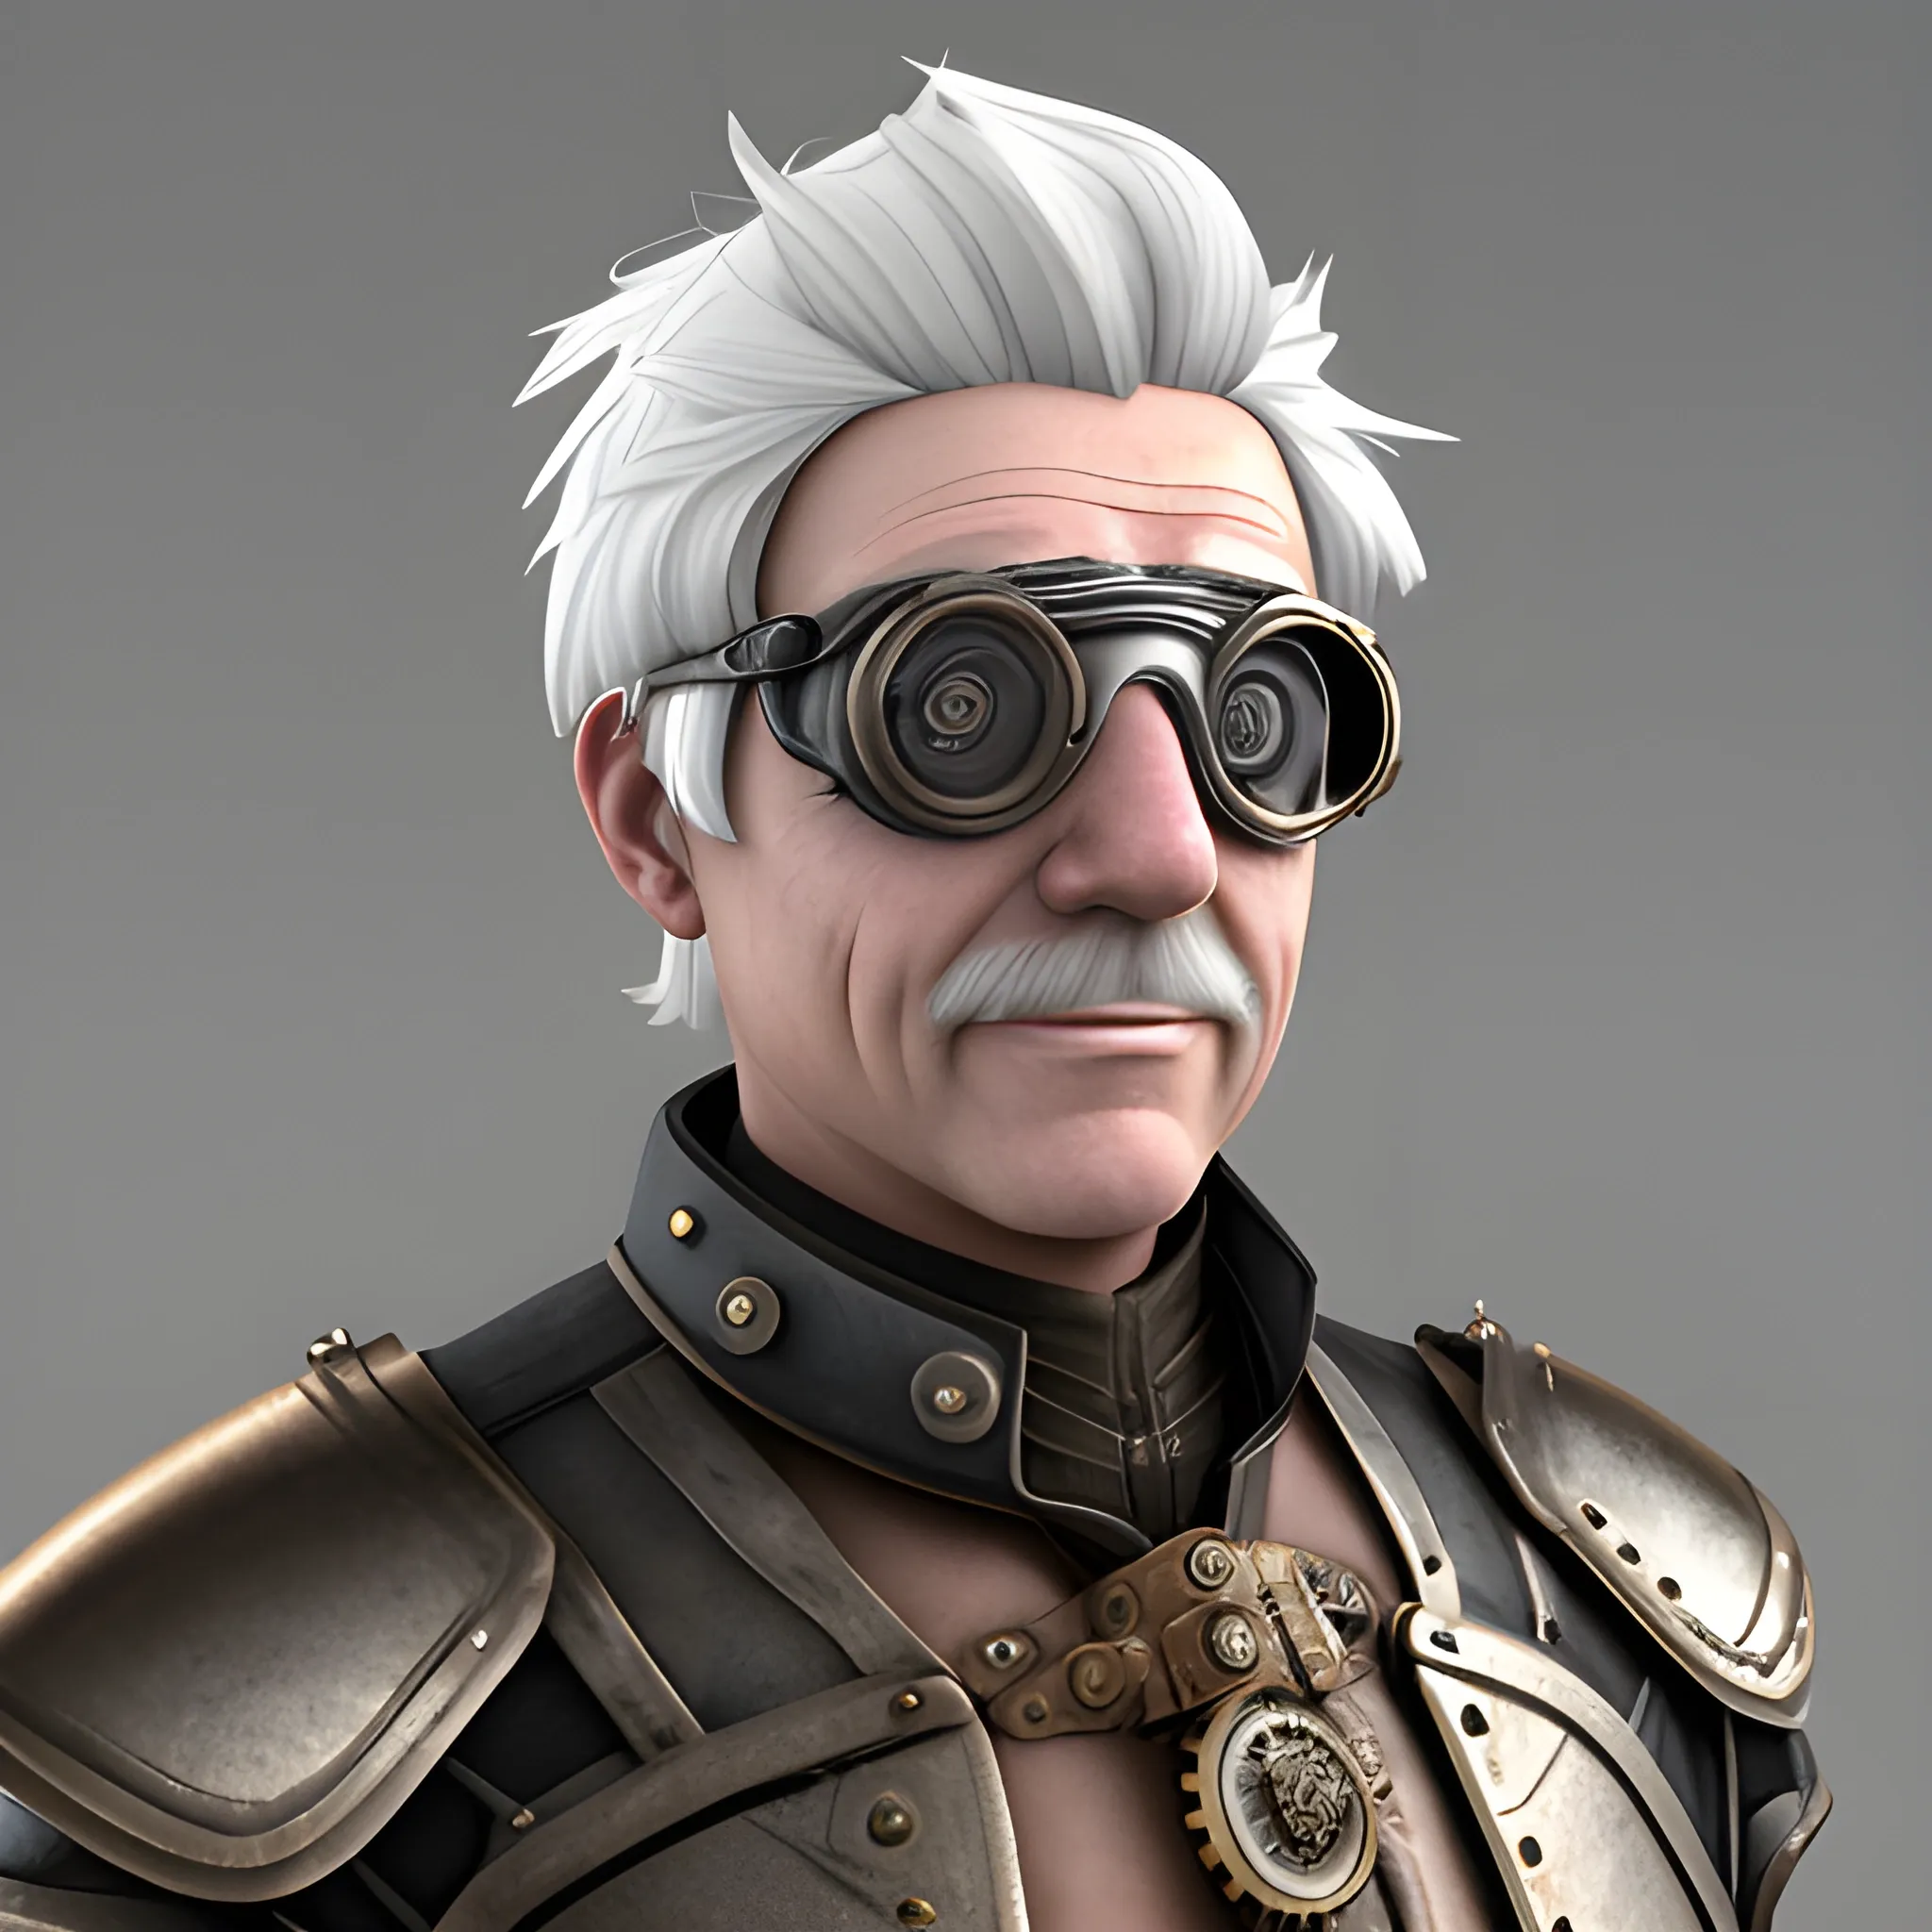 , 3D middle aged man, white hair, no beard, steam punk goggles, wearing light armor, skin color is gray